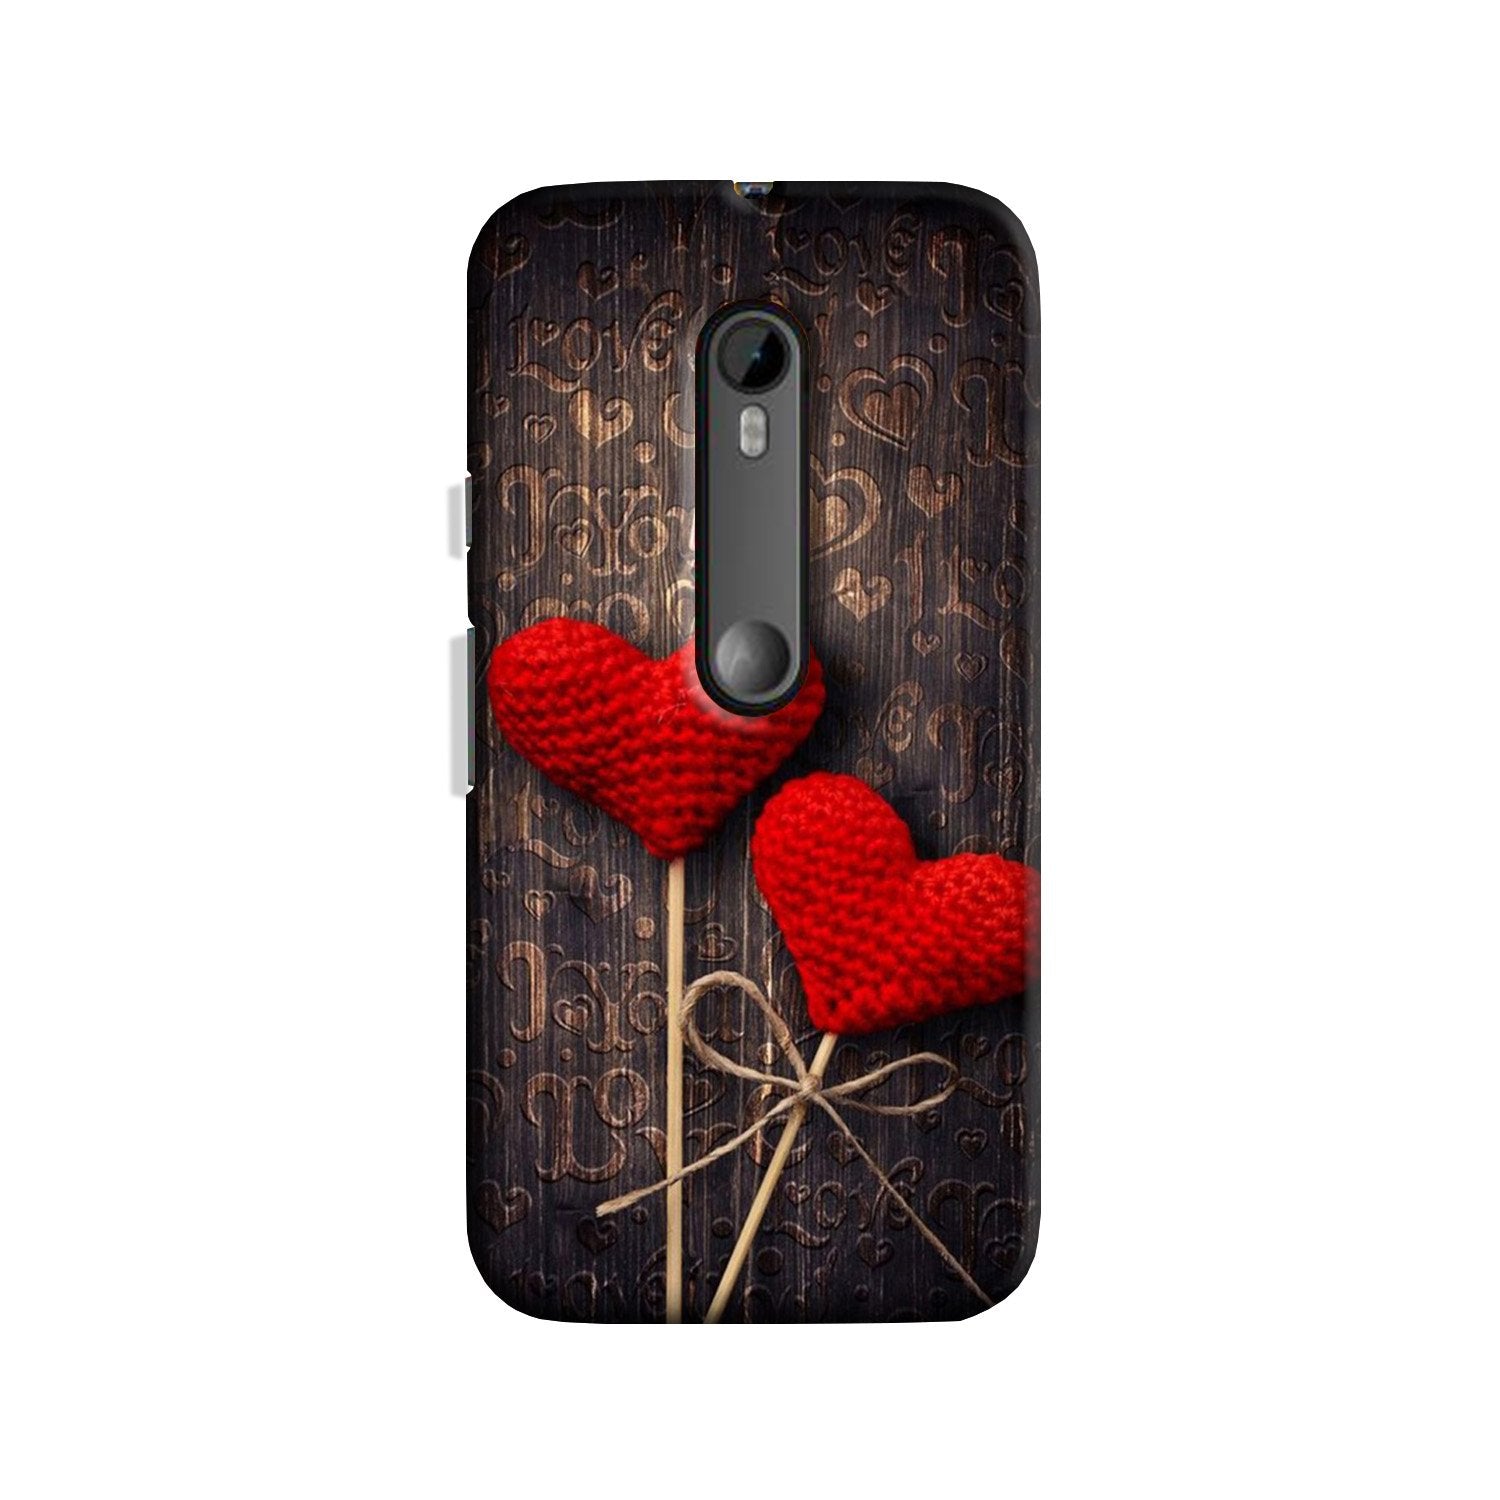 Red Hearts Case for Moto G3